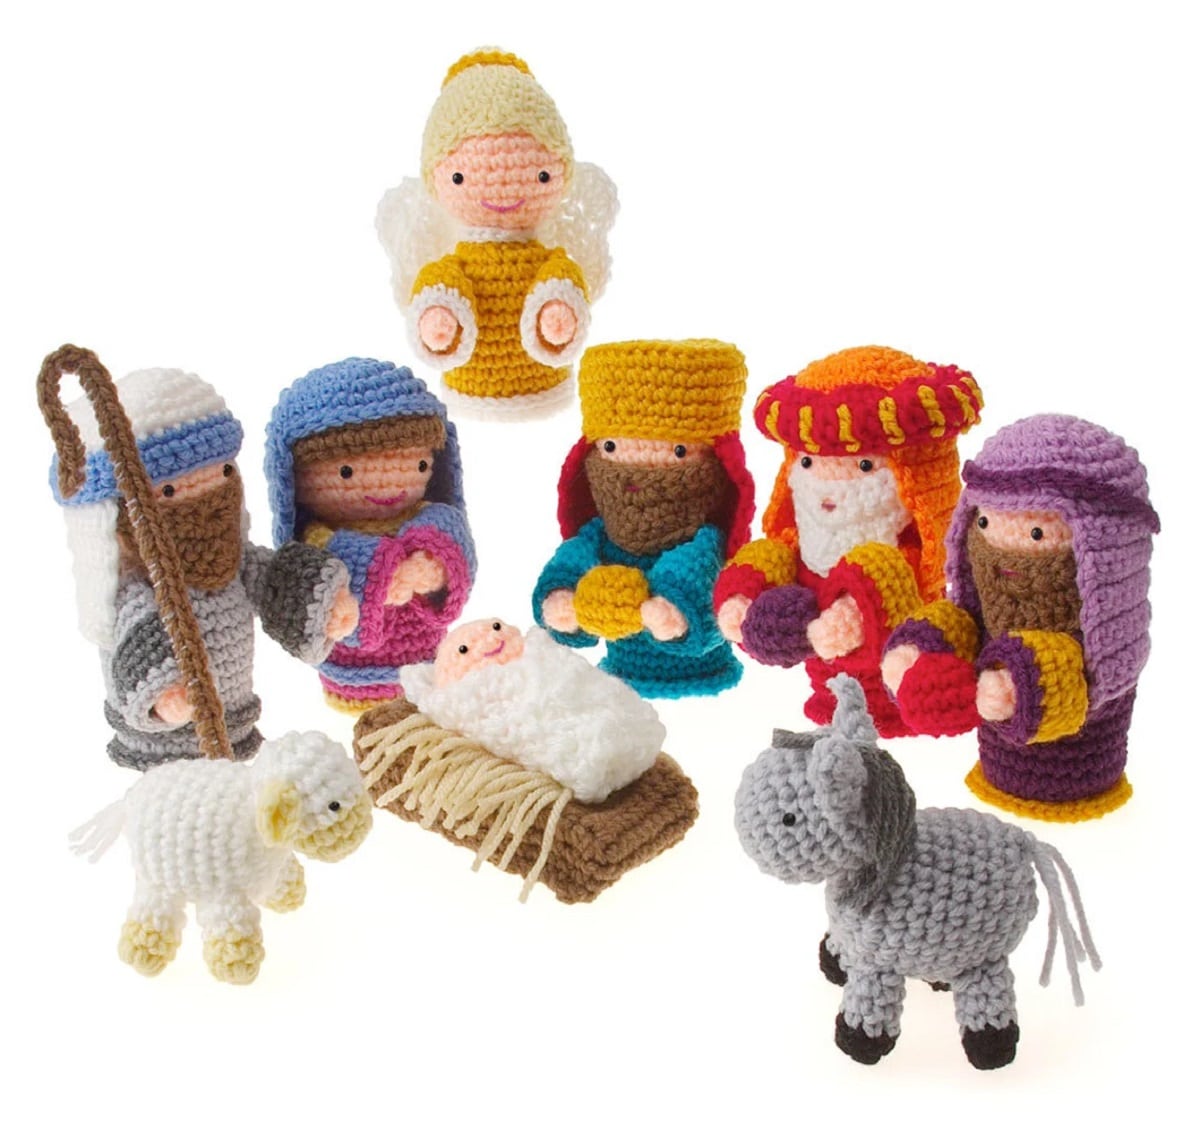 Brightly colored nativity scene including the wise men, Mary and Joseph, the angel Gabriel, a sheep and donkey, and baby Jesus.